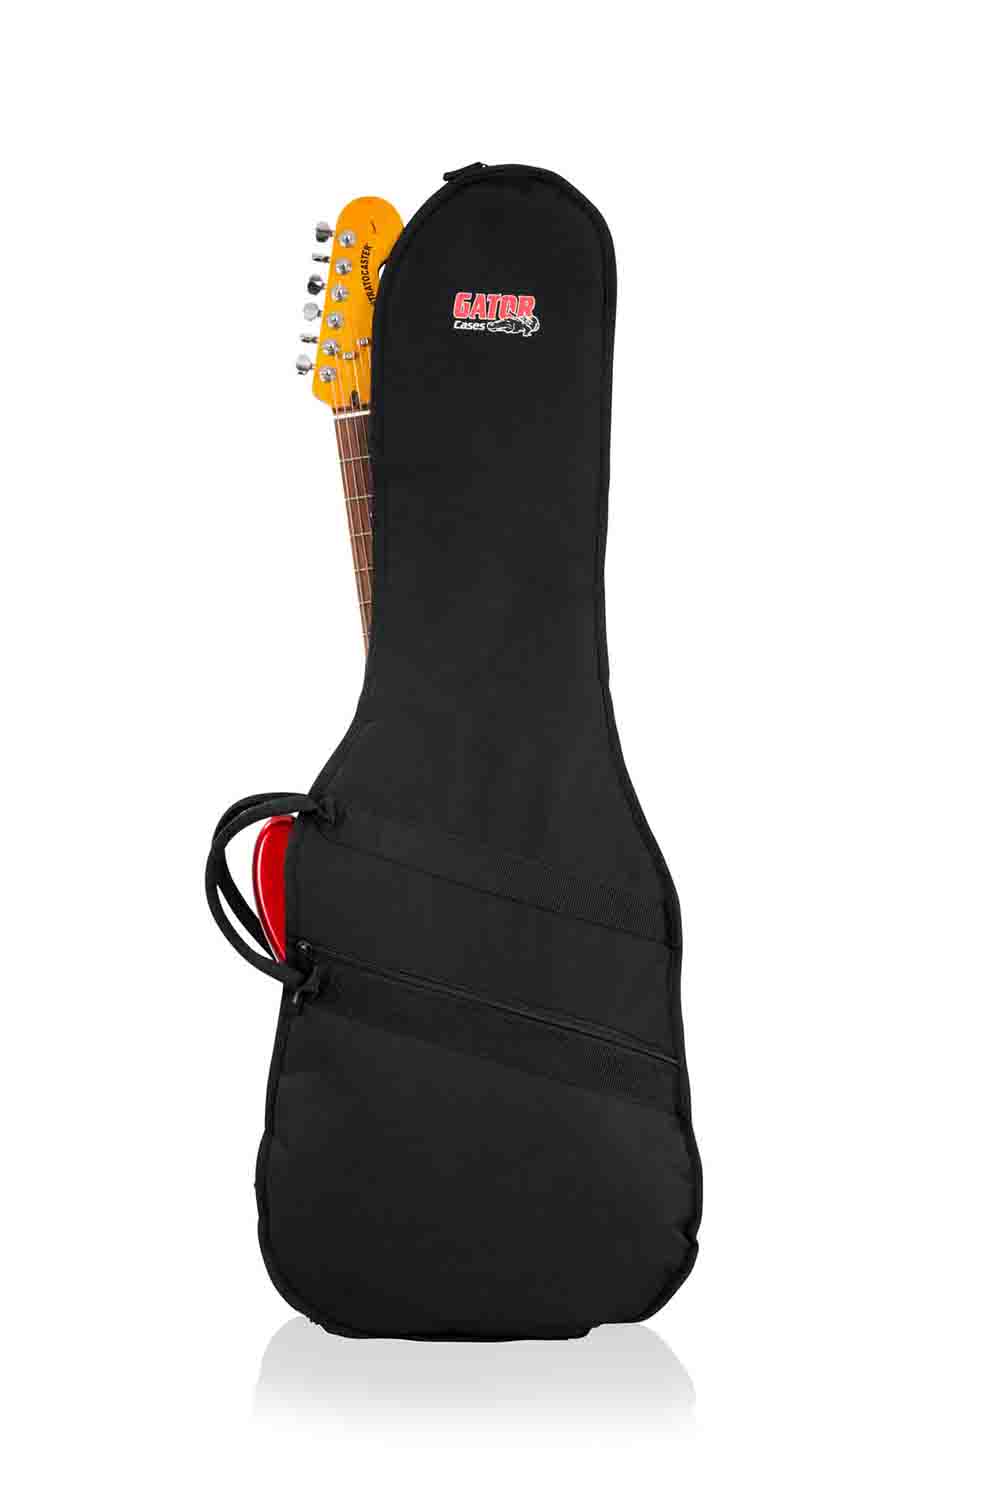 Gator GBE-ELECT Economy Gig Bag for Electric Guitars by Gator Cases